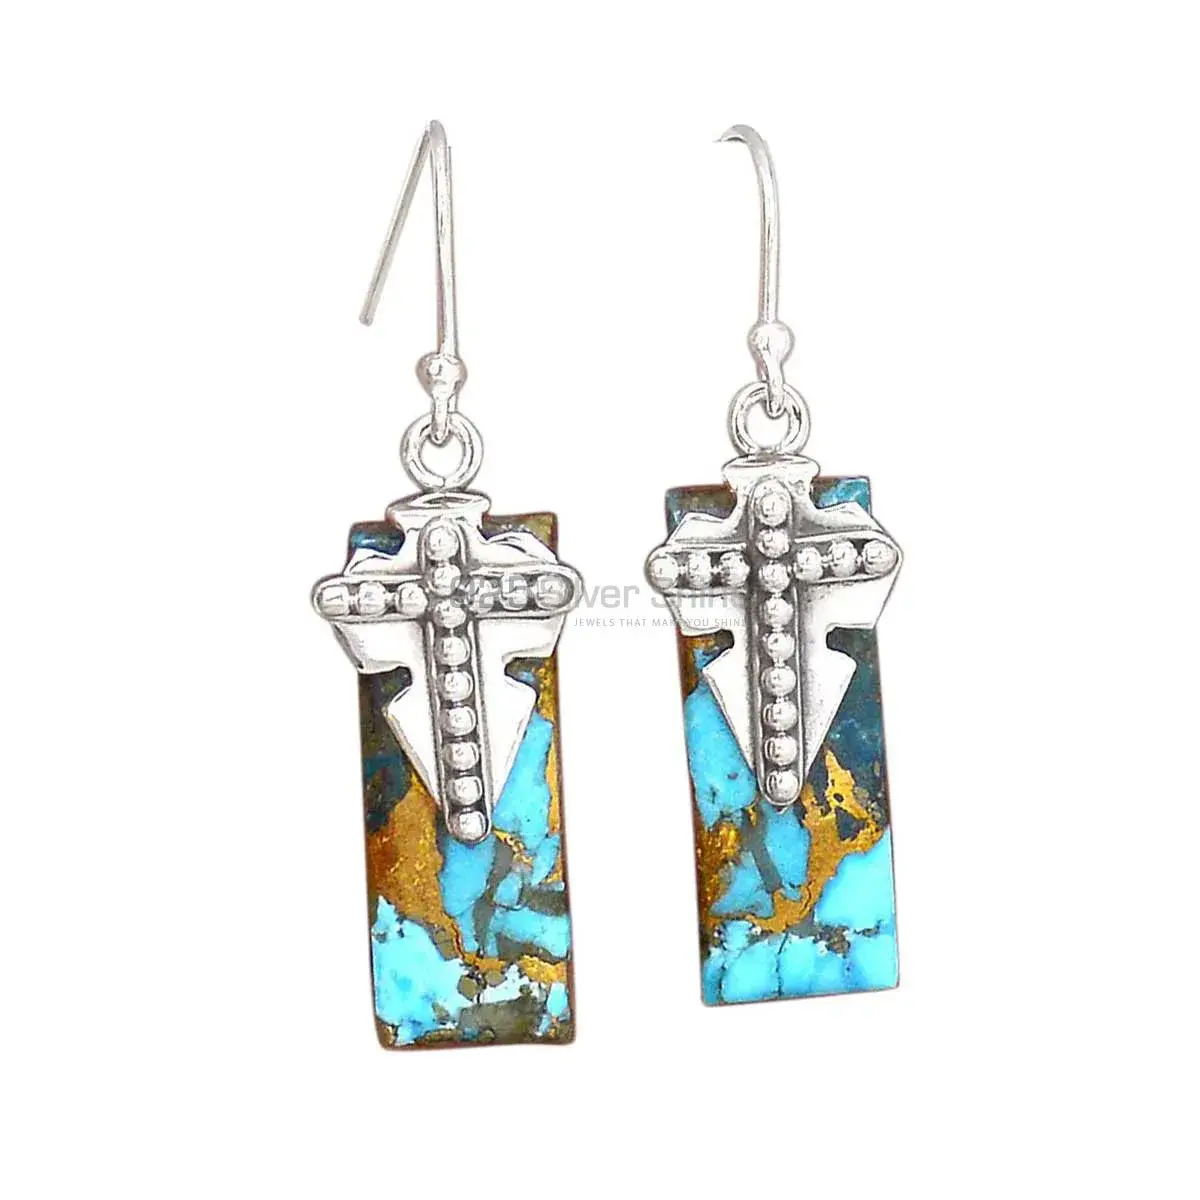 High Quality 925 Sterling Silver Earrings In Copper Turquoise Gemstone Jewelry 925SE2613